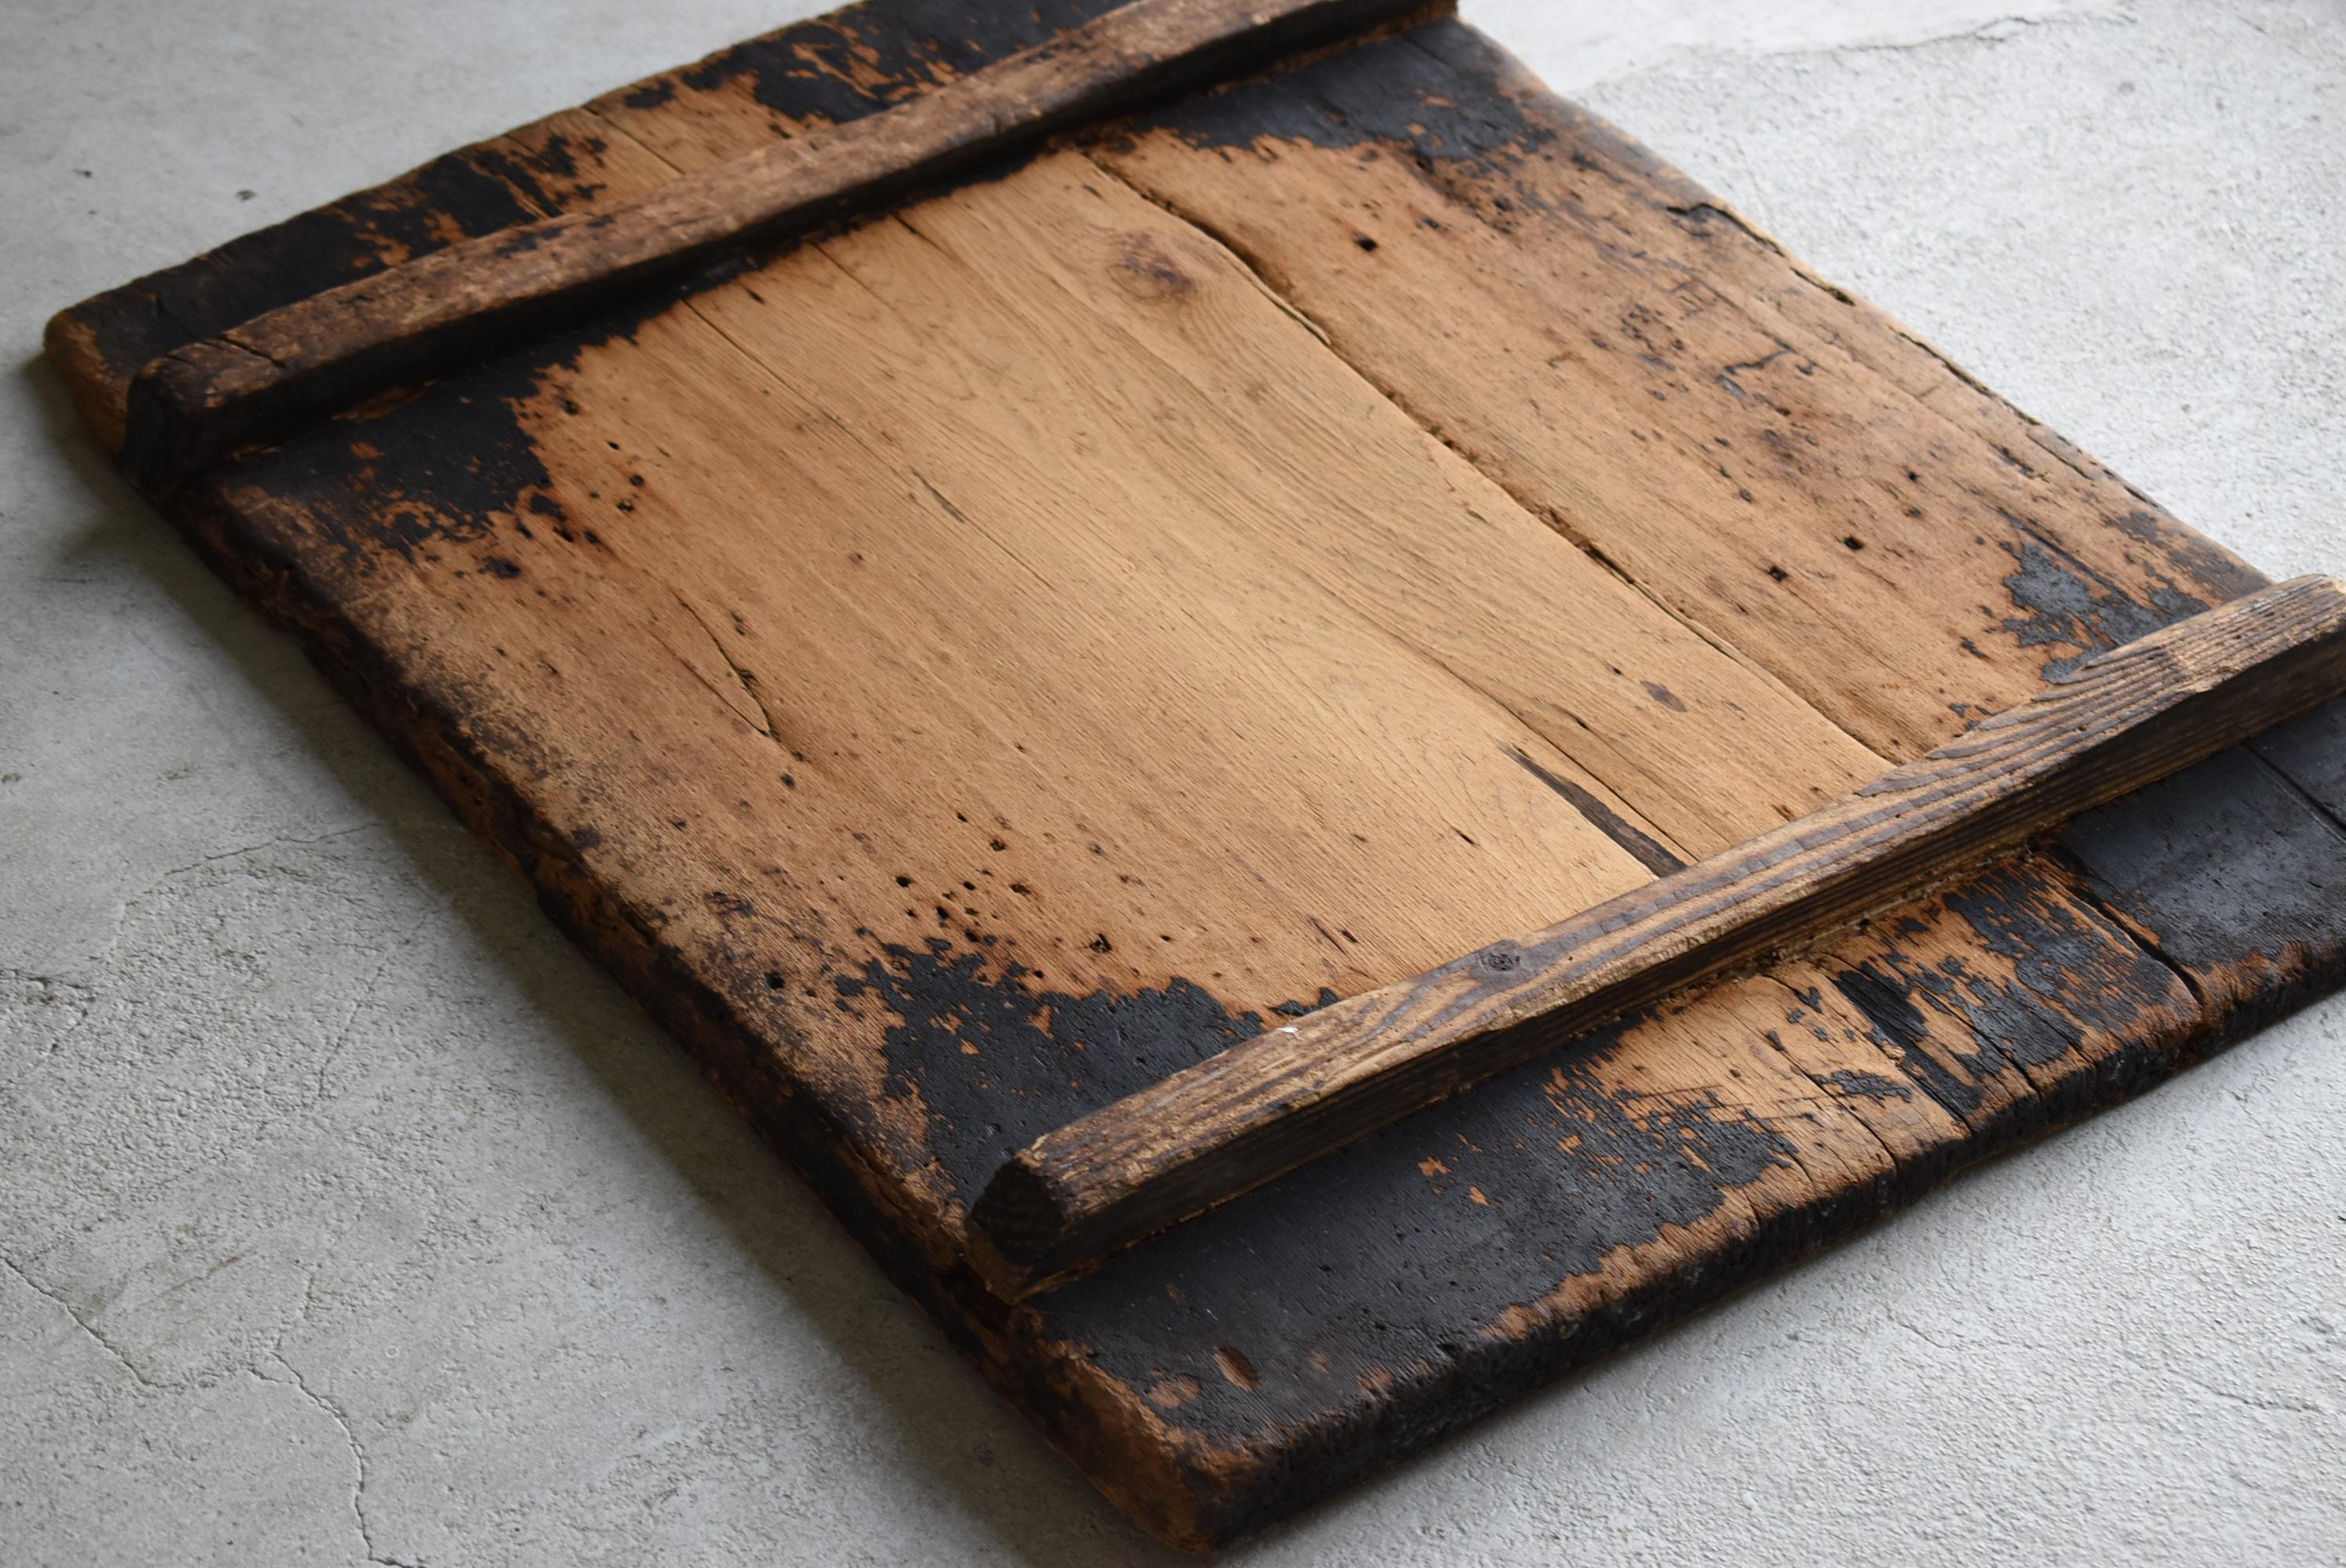 19th Century Japanese Antique Wooden Board 1800s-1900s/Abstract Art Working Table Wabisabi